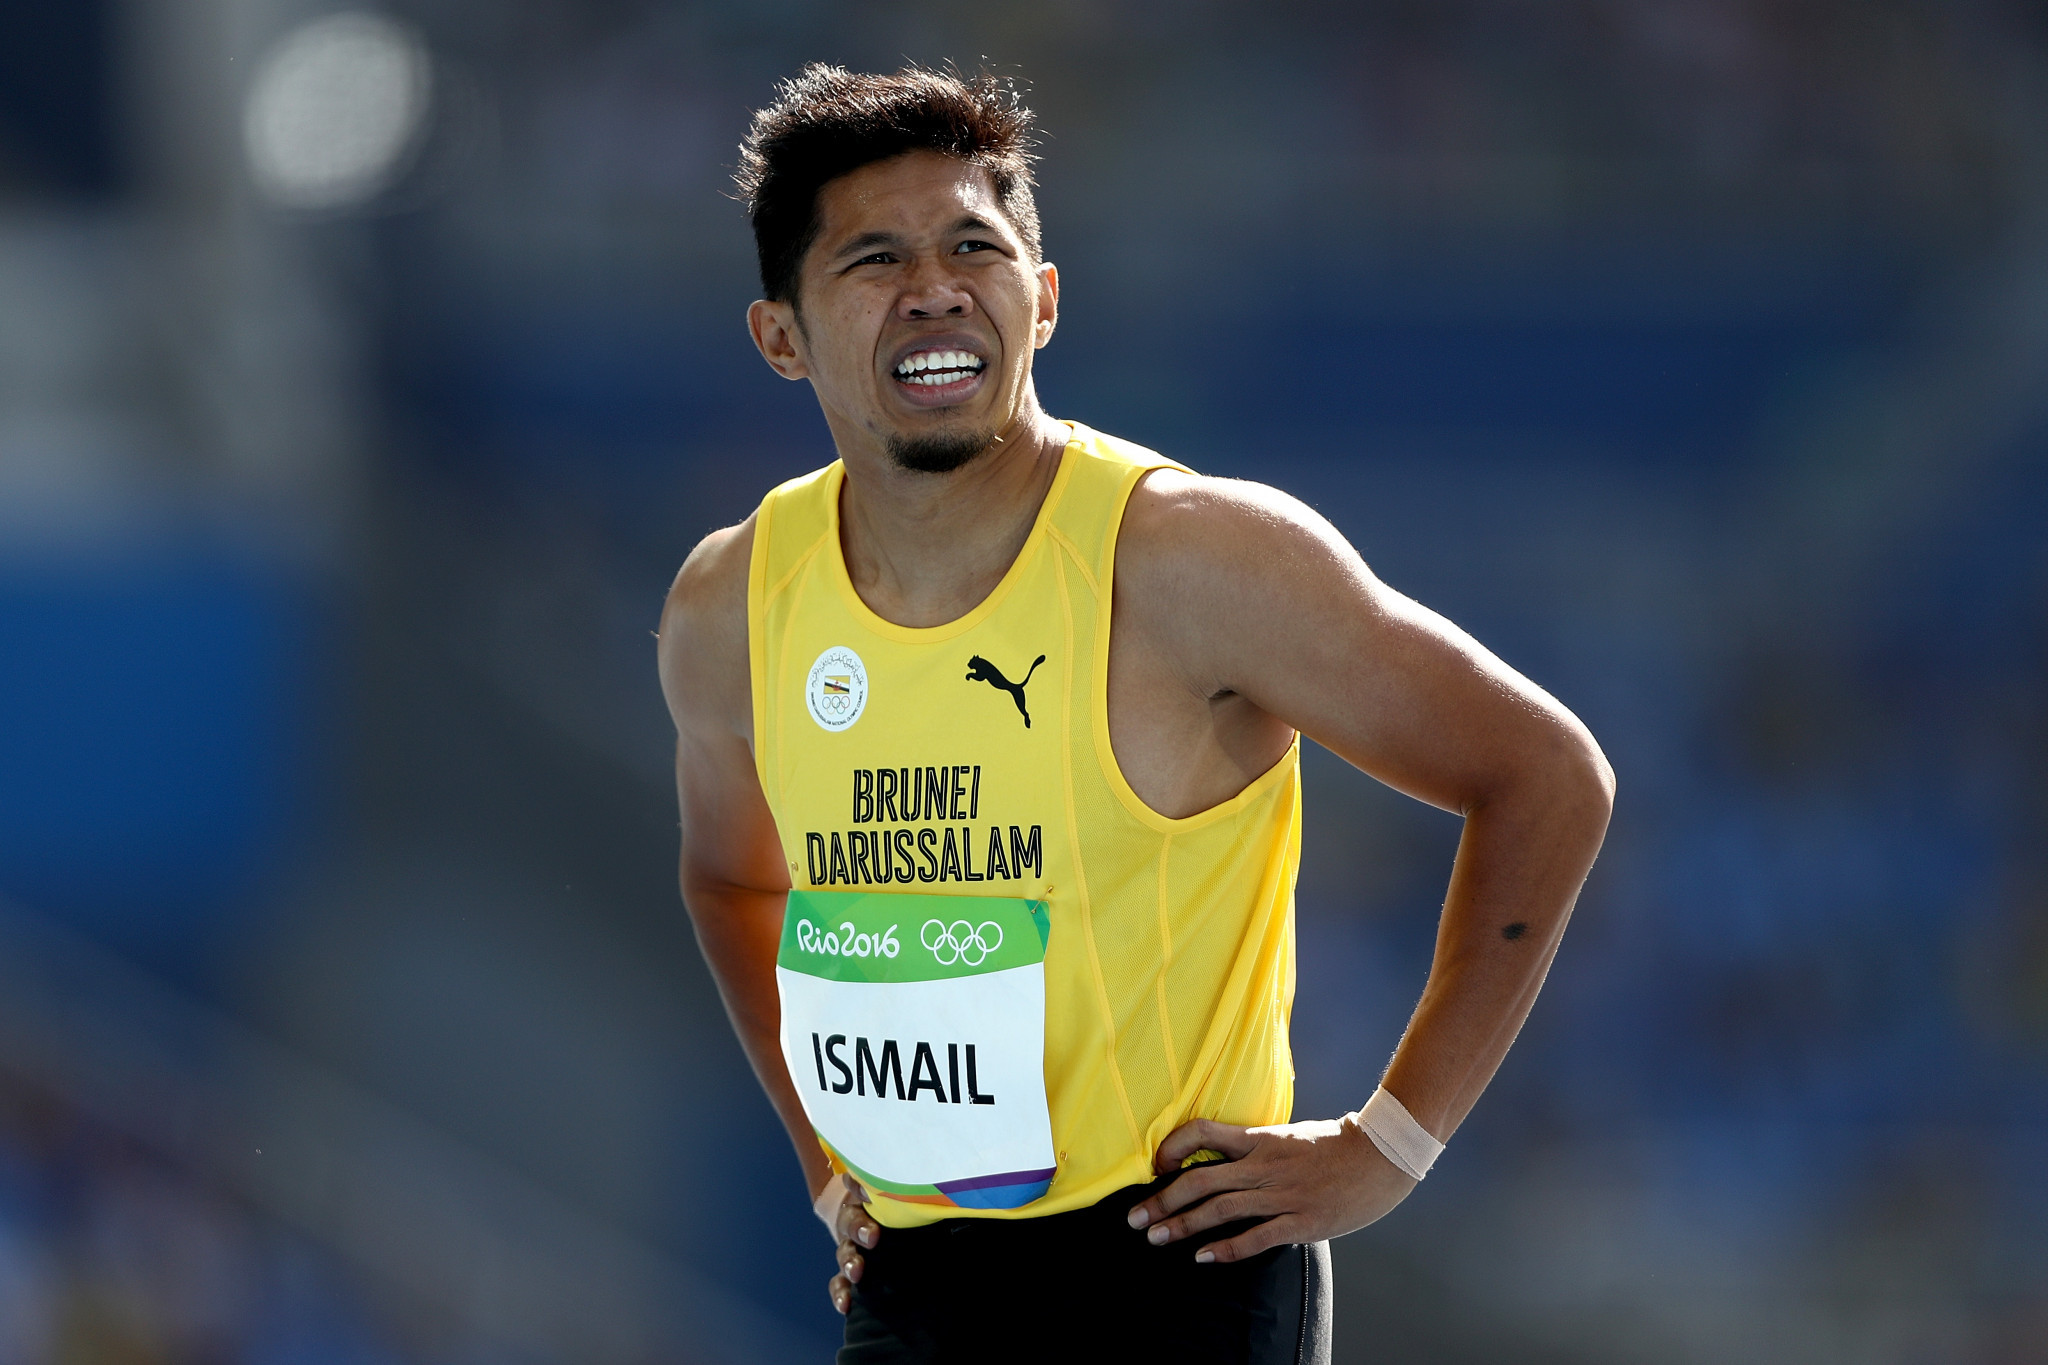 Dr Hj Danish Zaheer helped Brunei athletes across the world ©Getty Images